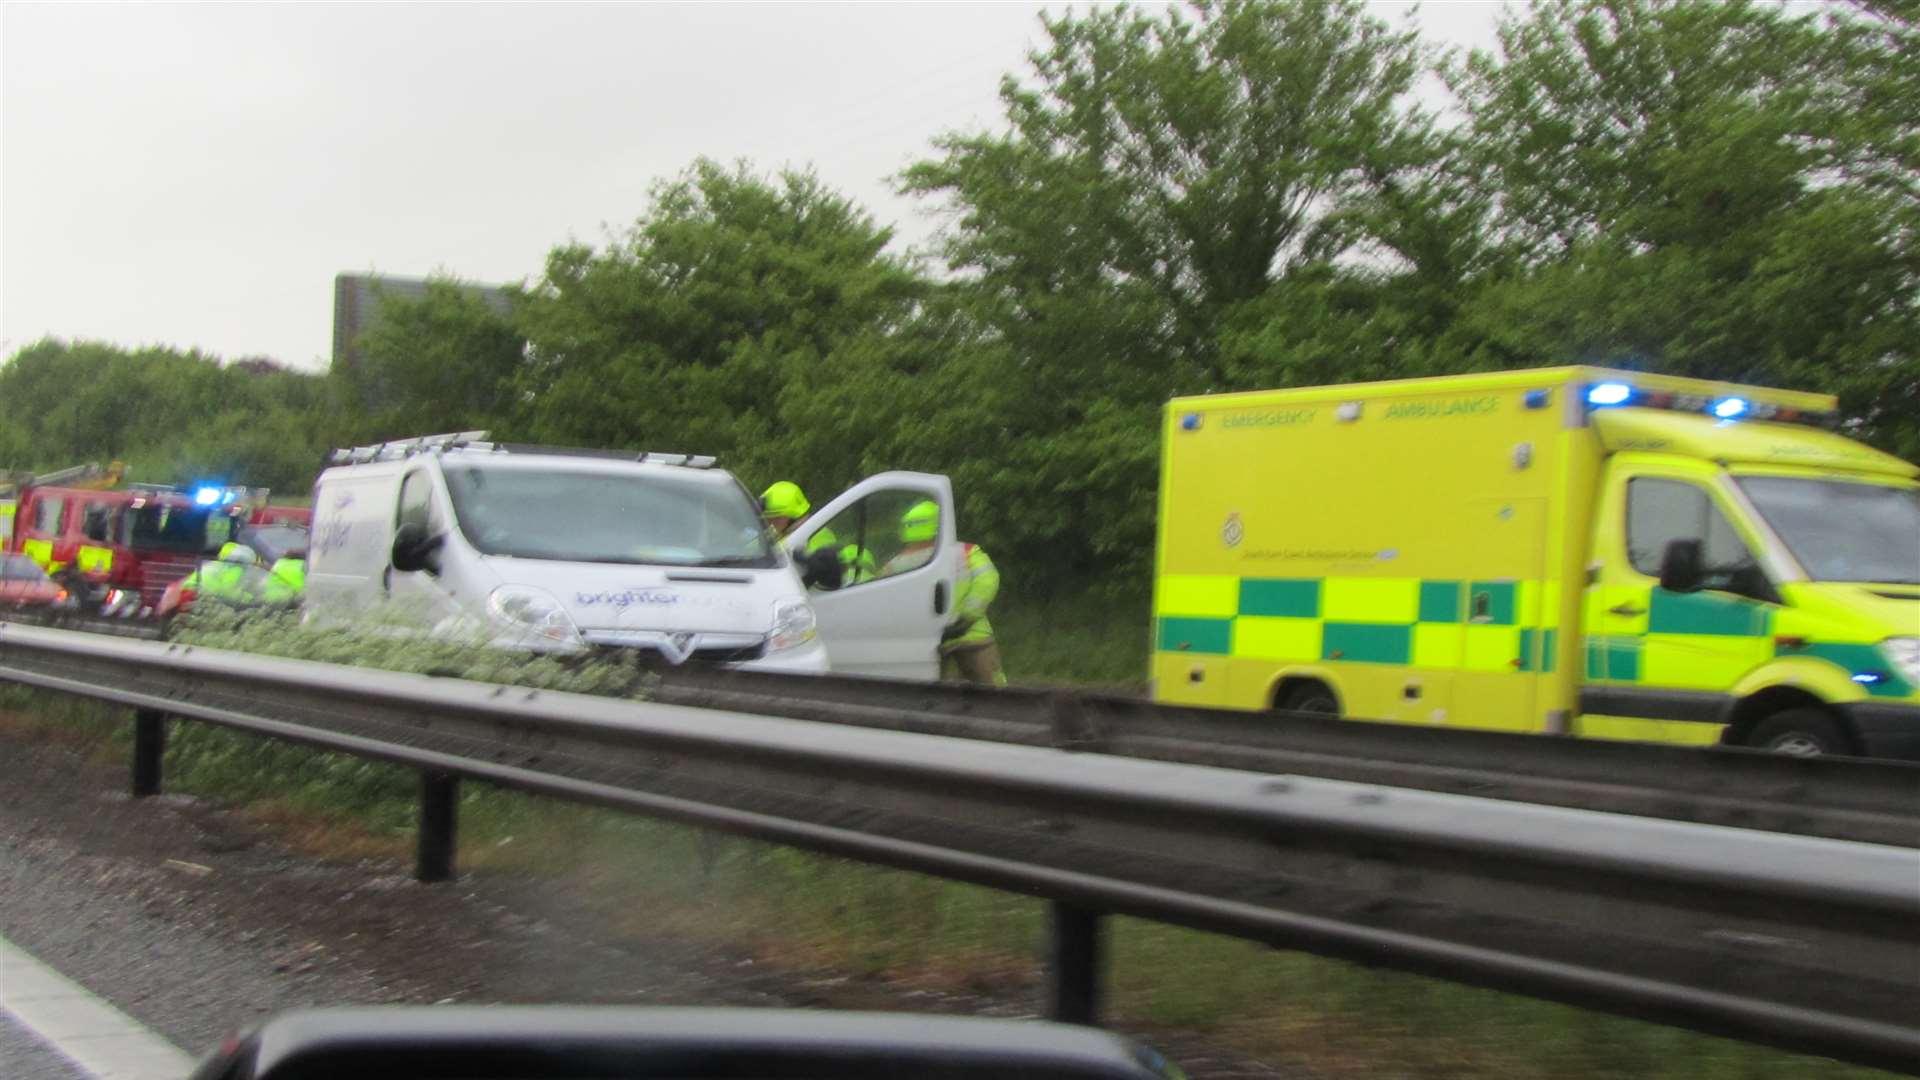 Emergency crews at the scene of the accident on the M2 London bound this morning